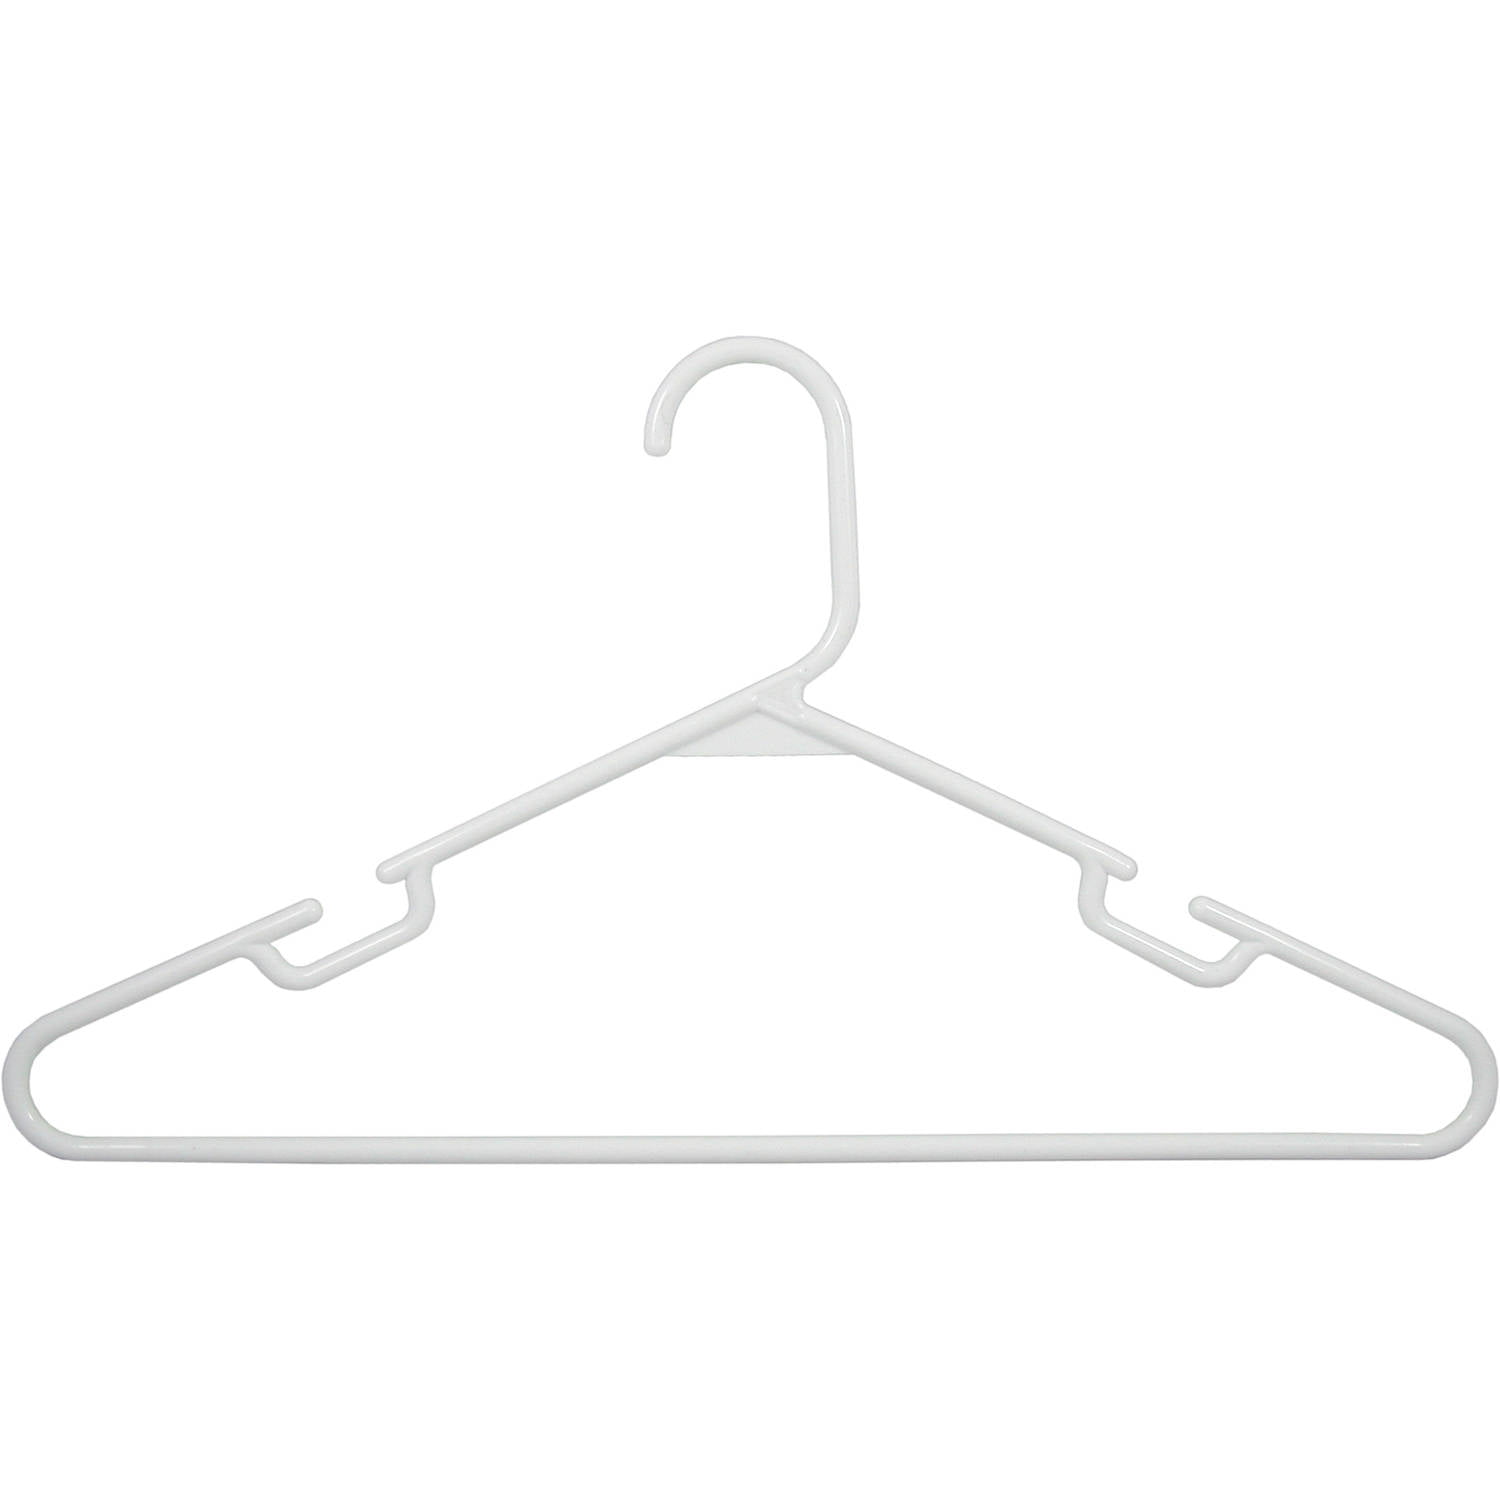 Gray Plastic Adult Clothes Hangers Standard Size Pack of 7 Hook Ring Round.